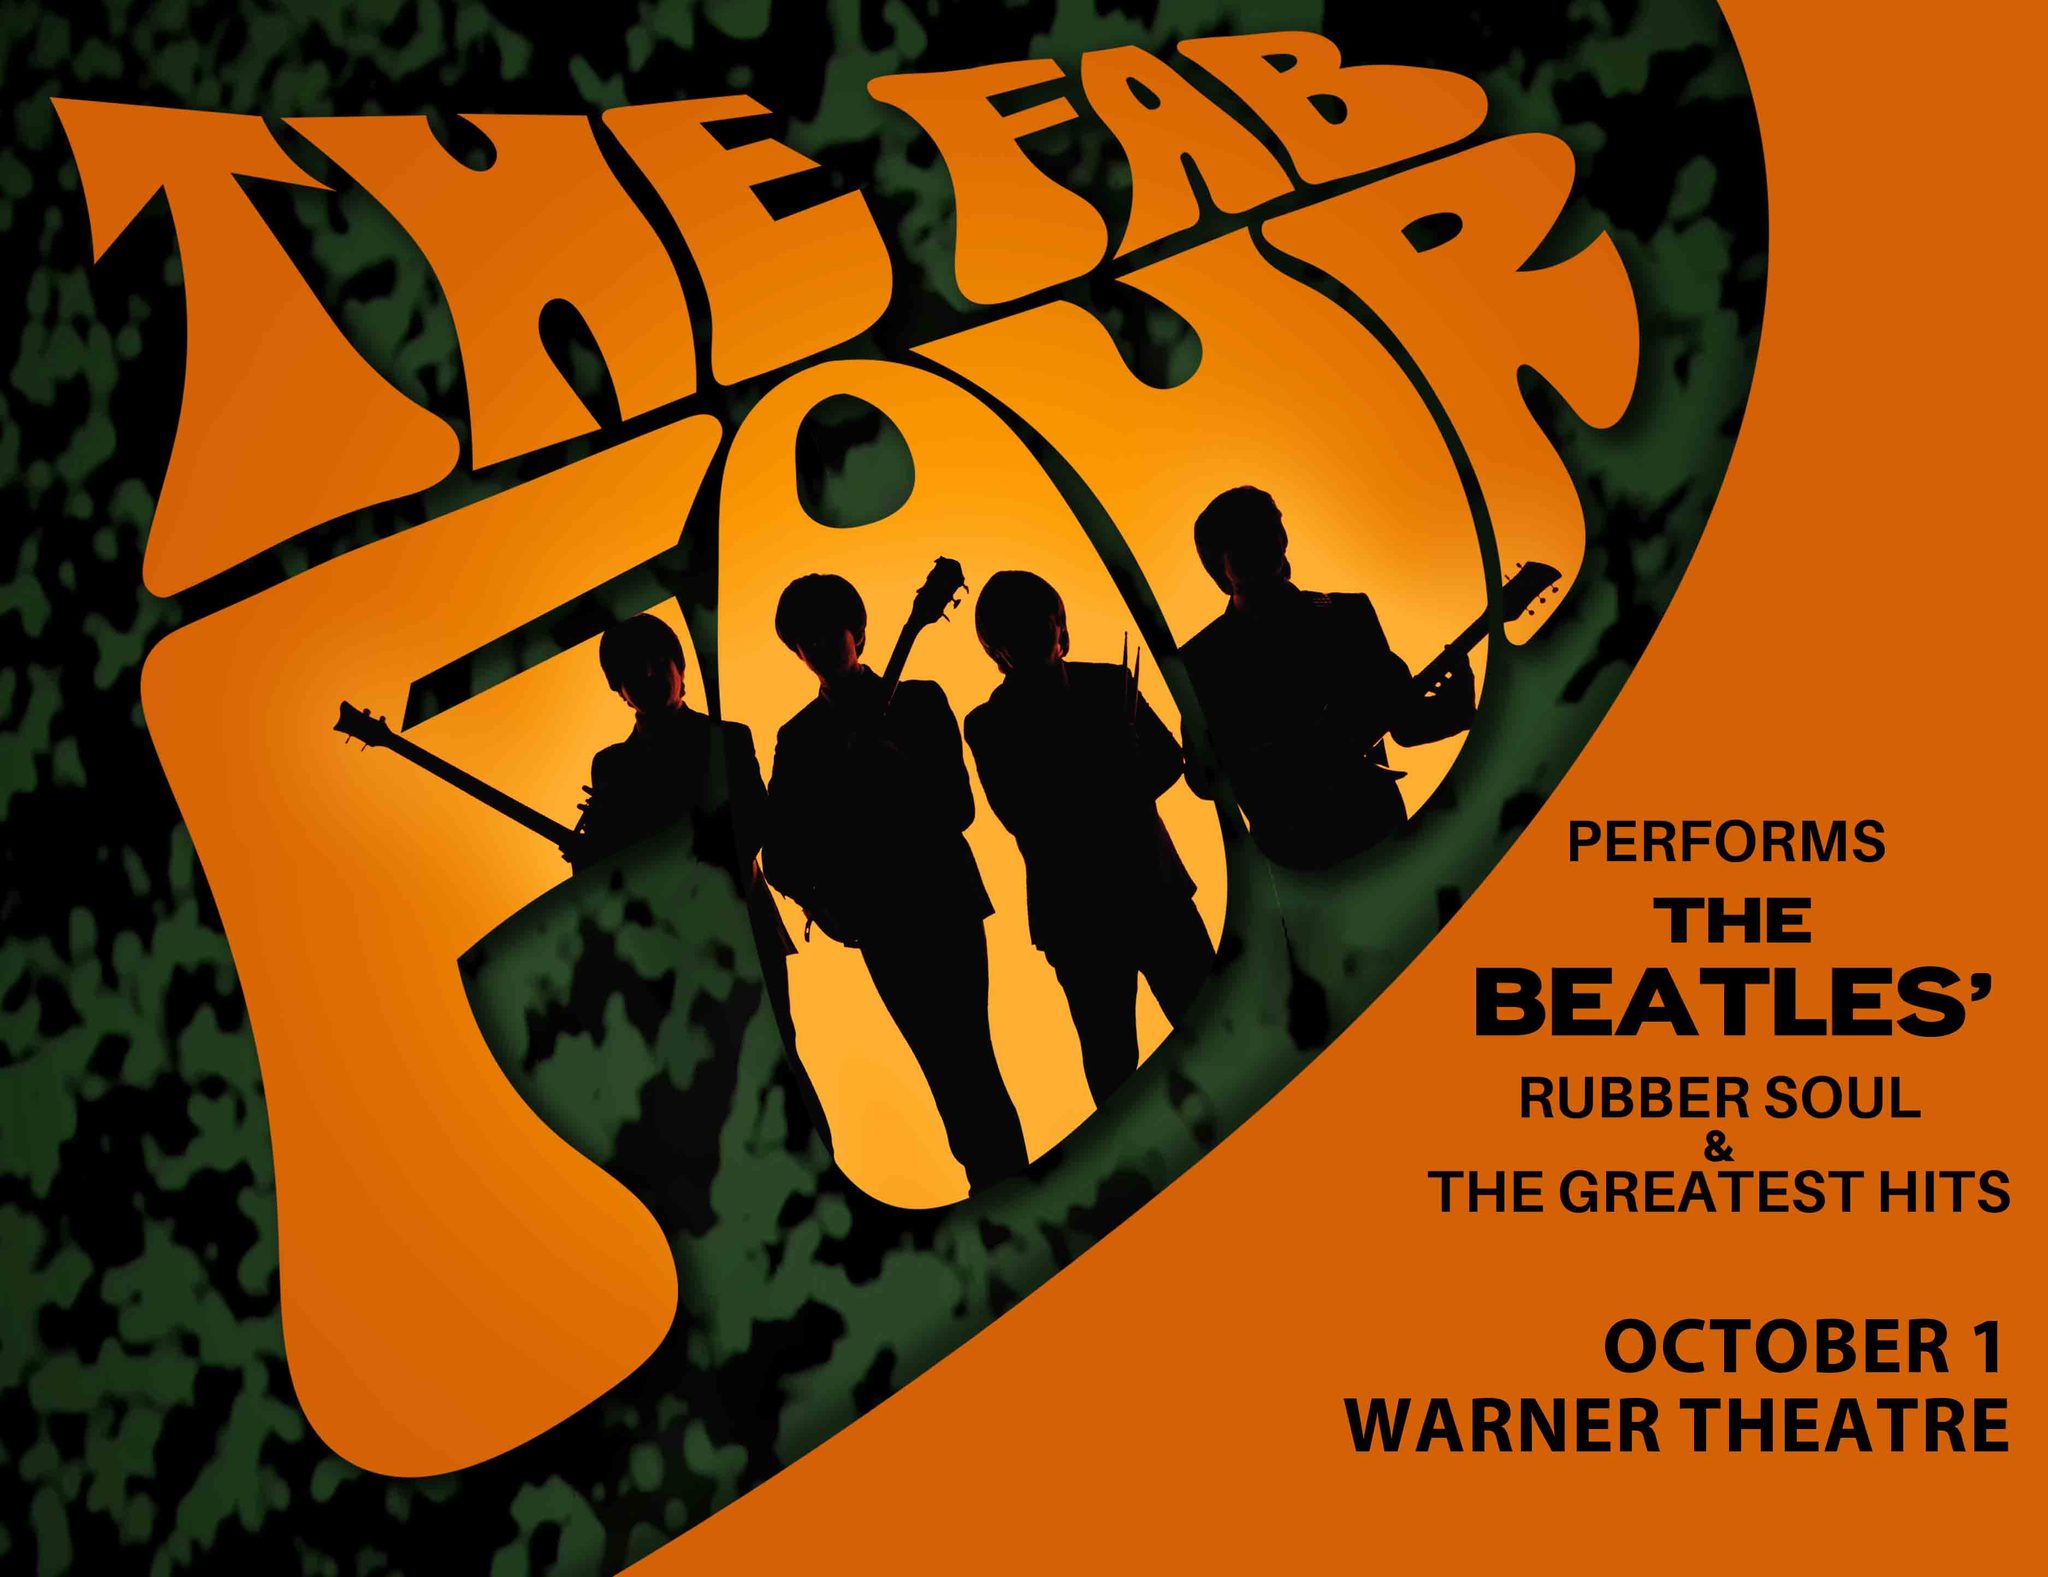 Warner Theatre to Host The Fab Four Ultimate Tribute Experience Concert